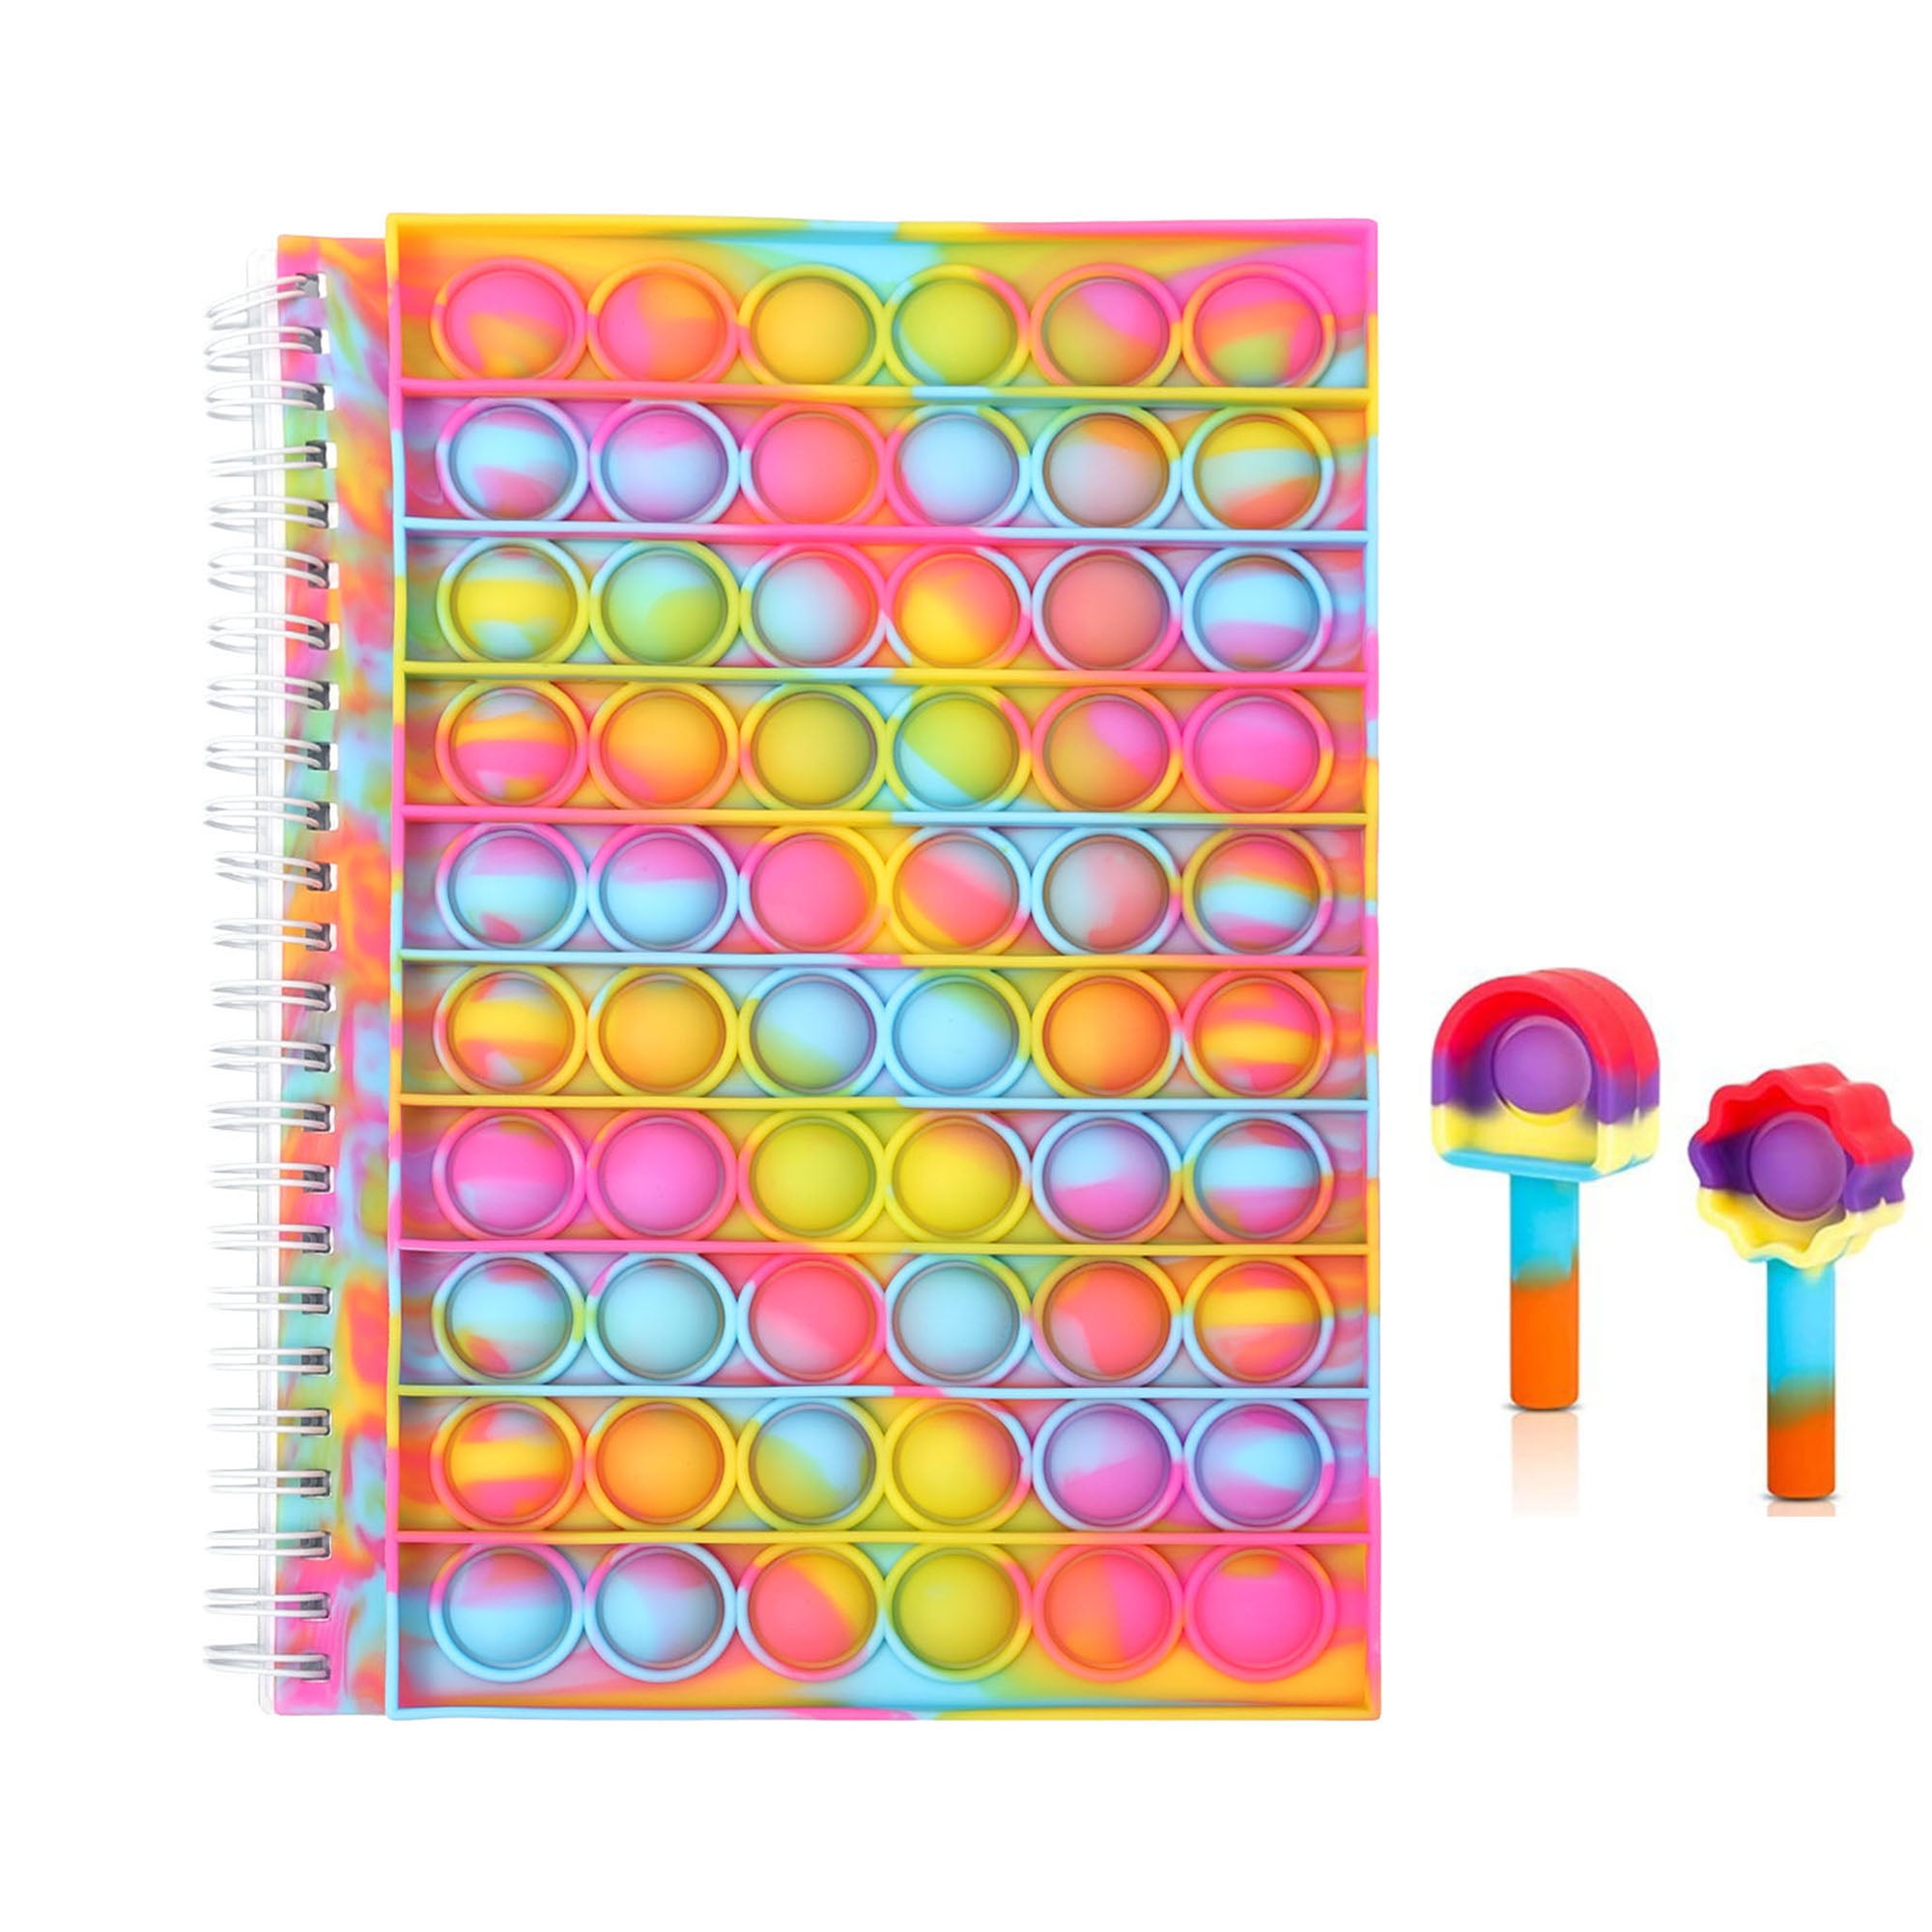 Pop Notebook with Cute Keychain Rainbow Pop on It Journal Bubble Notebook for Girls Portable Relieve Stress Fidget Notebook Toy Pop Bubble Notebook for Kids Adults Fidget Notebook for School Office 